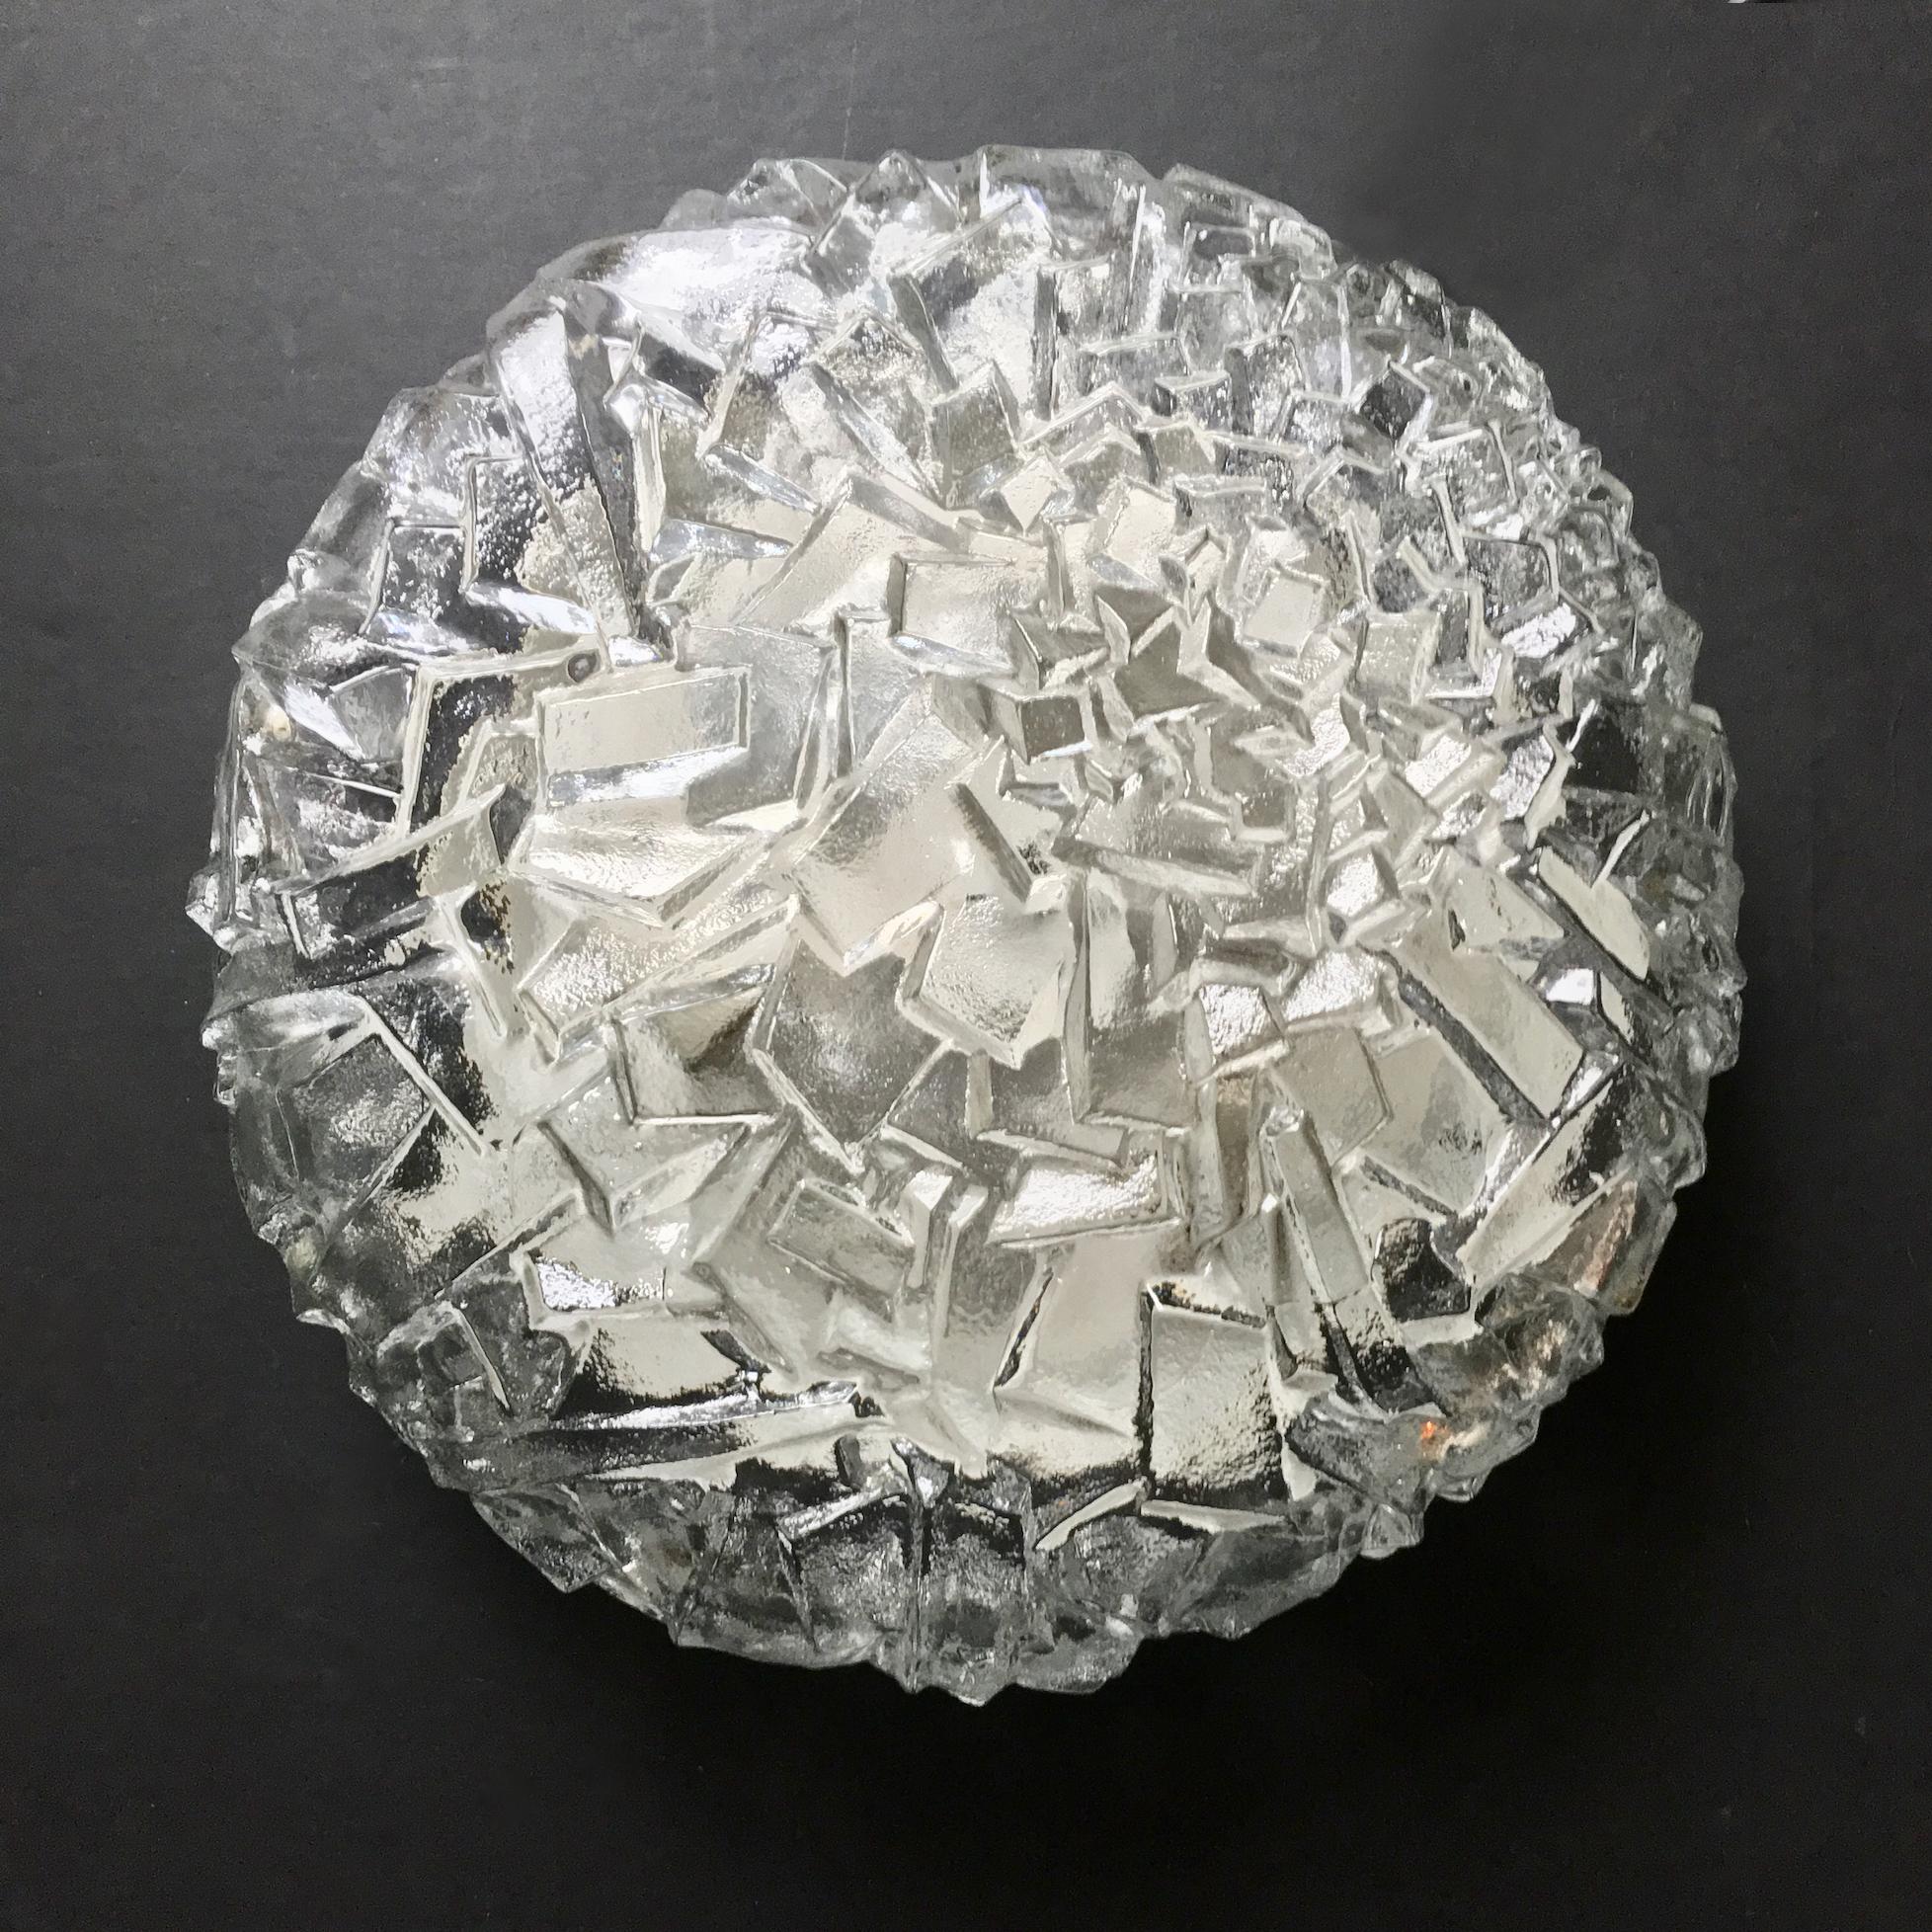 Large circular glass flush mount light with ice block pattern by Kaiser Leuchten, Germany, 1970s. 

The heavy shade comprises a single piece of thick clear glass folded around a white metal frame, held in place with three steel screws as shown. An